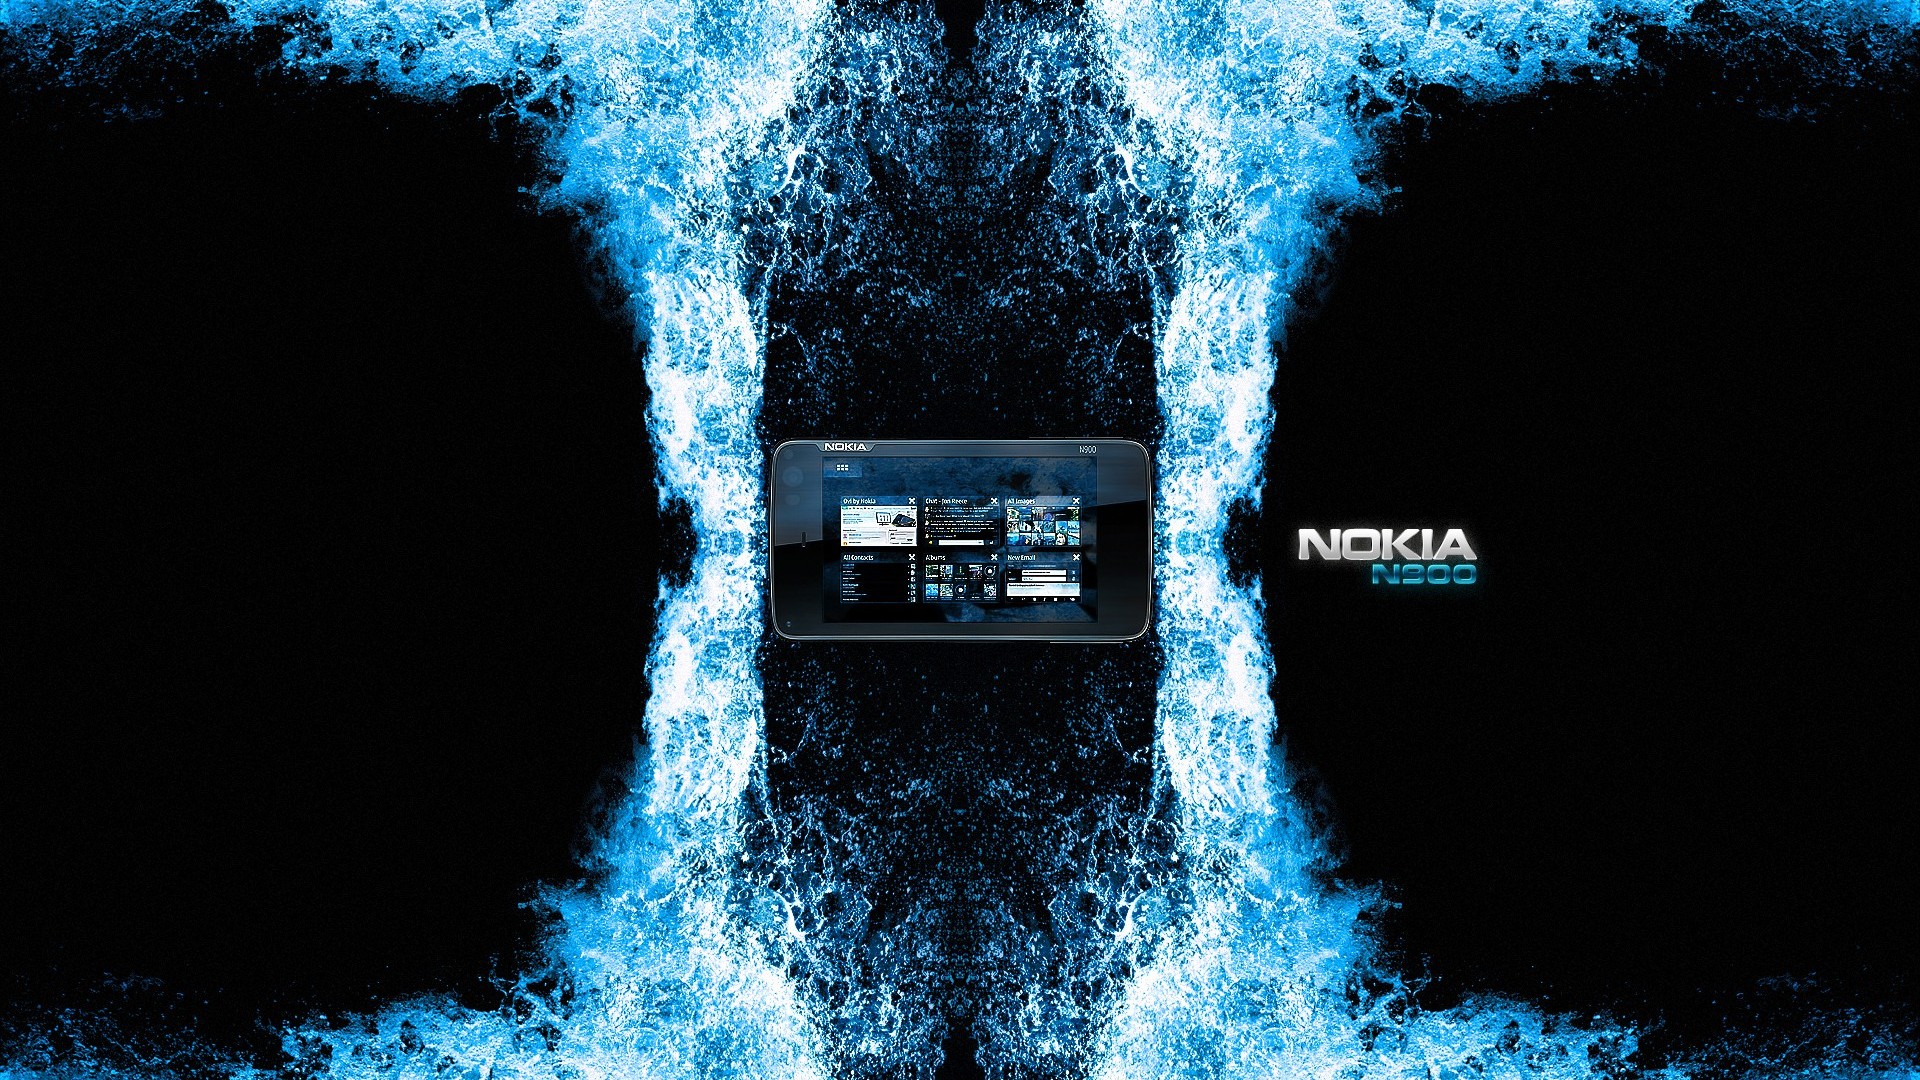 Nokia Hd Wallpaper For Pc